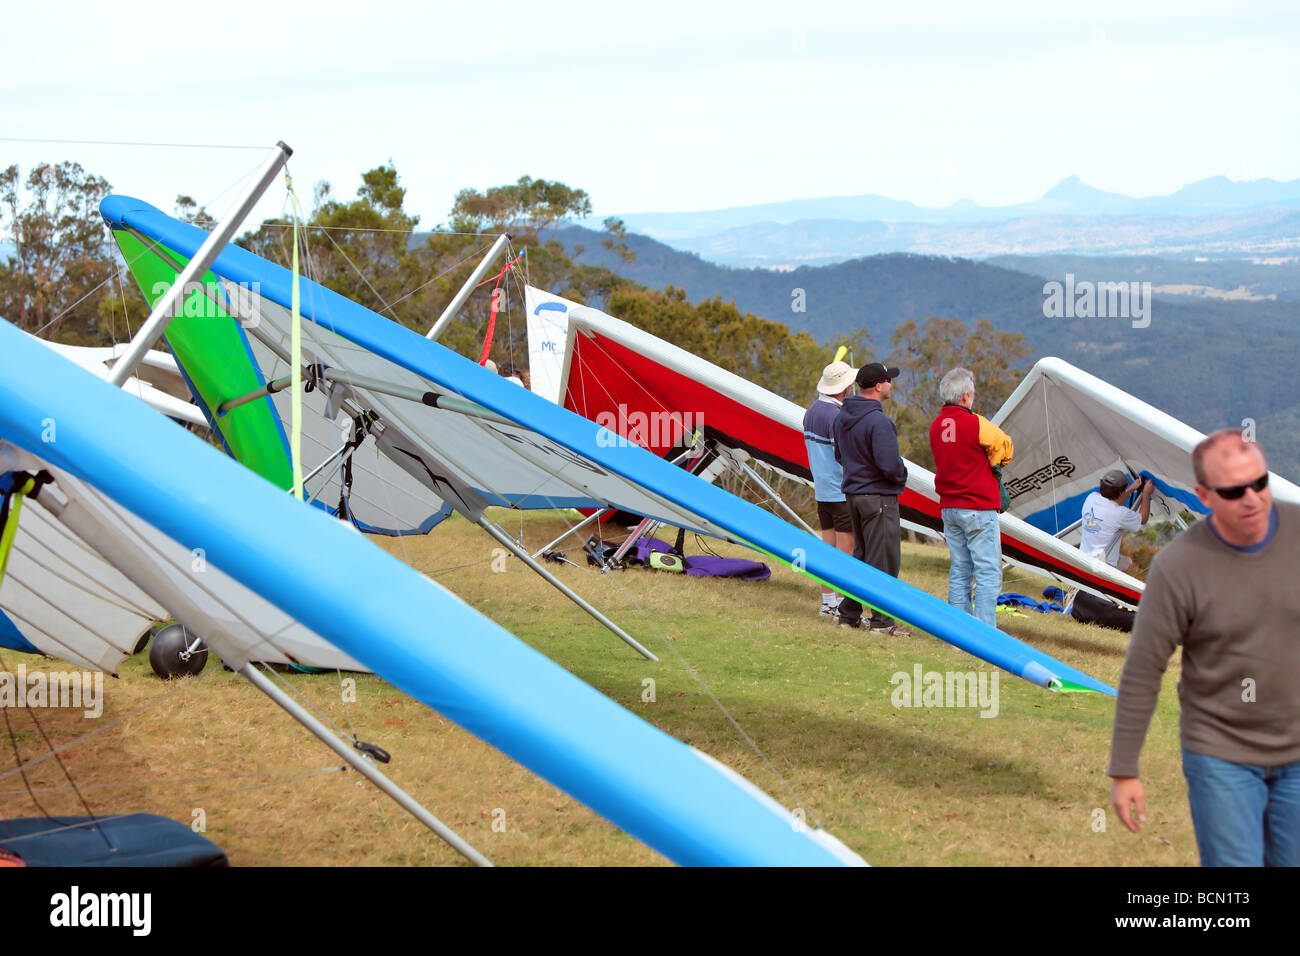 Pilots assembling their hang gliders prior to flight Stock Photo